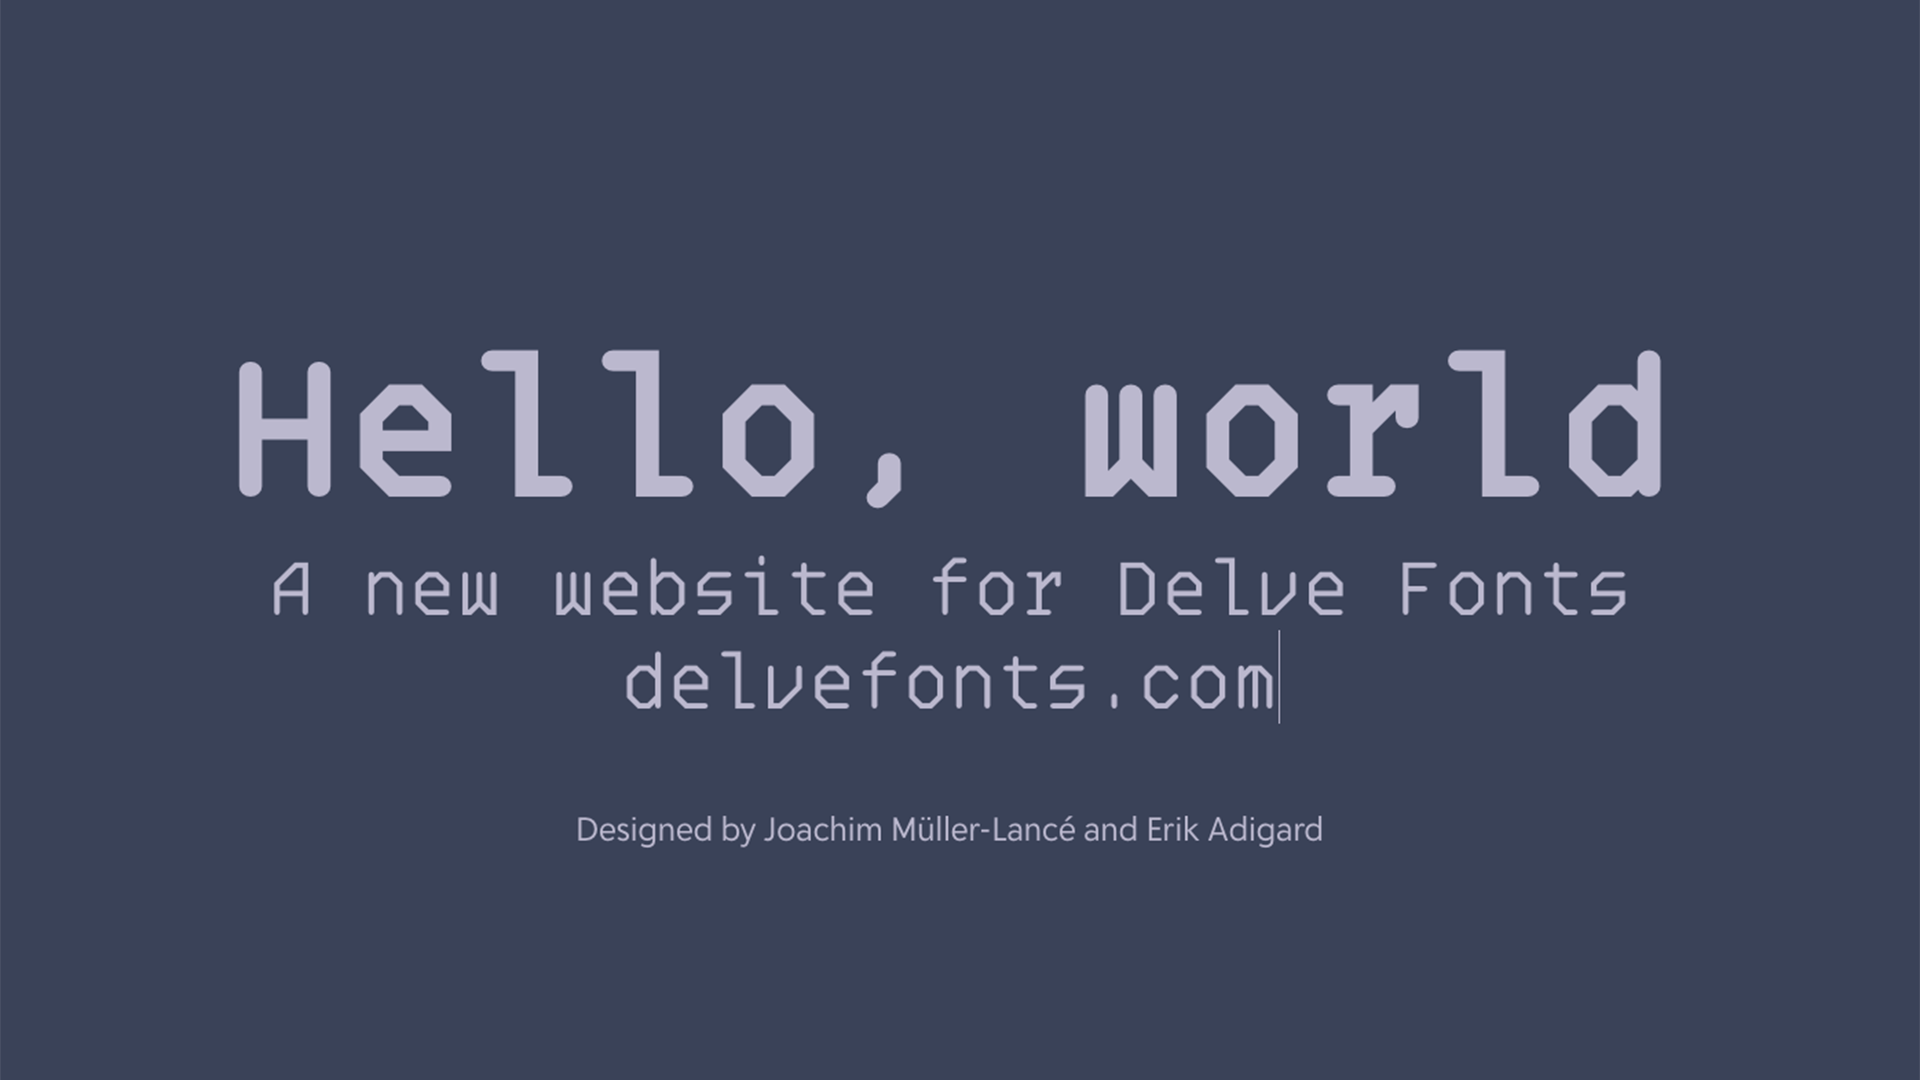 Hello, world: A new website for Delve Fonts